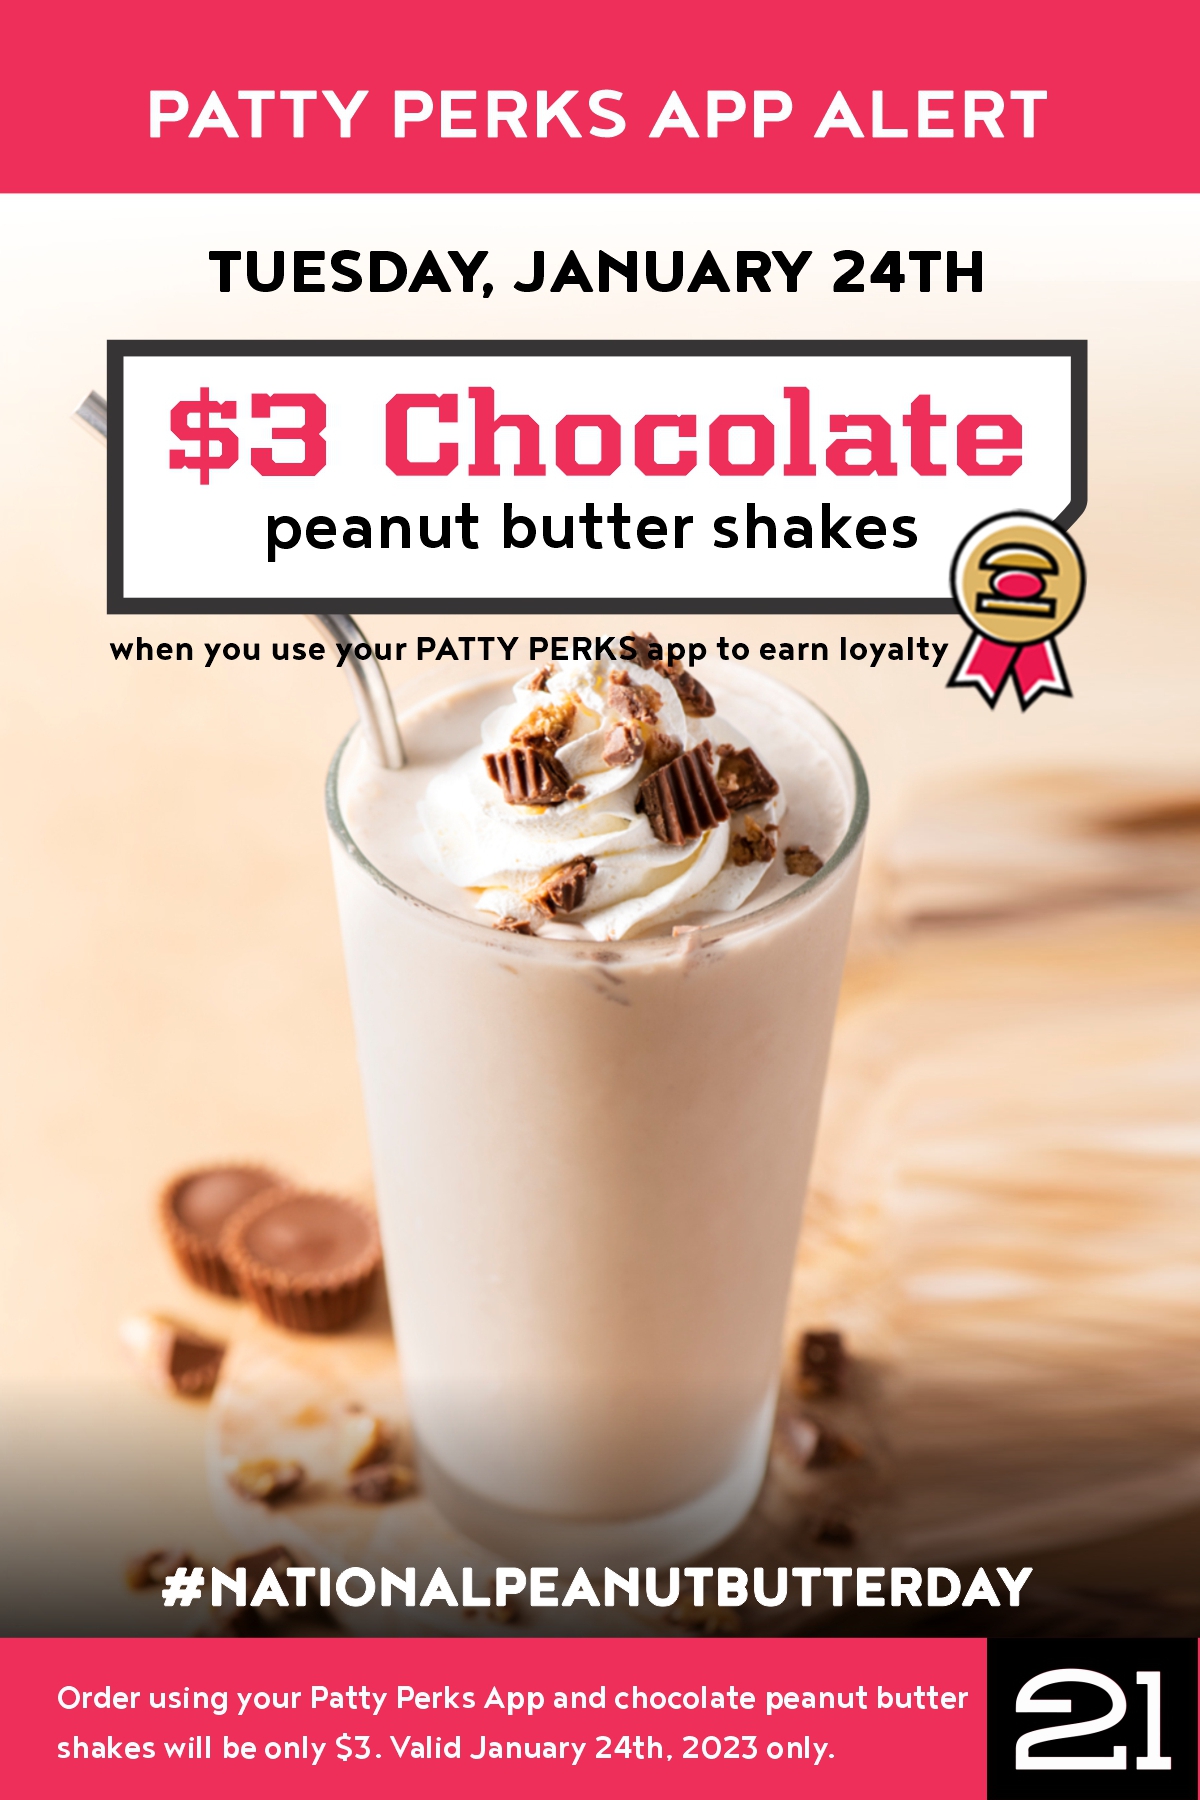 Grab a $3 Chocolate Peanut Butter Shake for 
National Peanut Butter Day, when you use 
your Patty Perks App. No limits on number purchased. 
Valid January 24th, 2023 only.